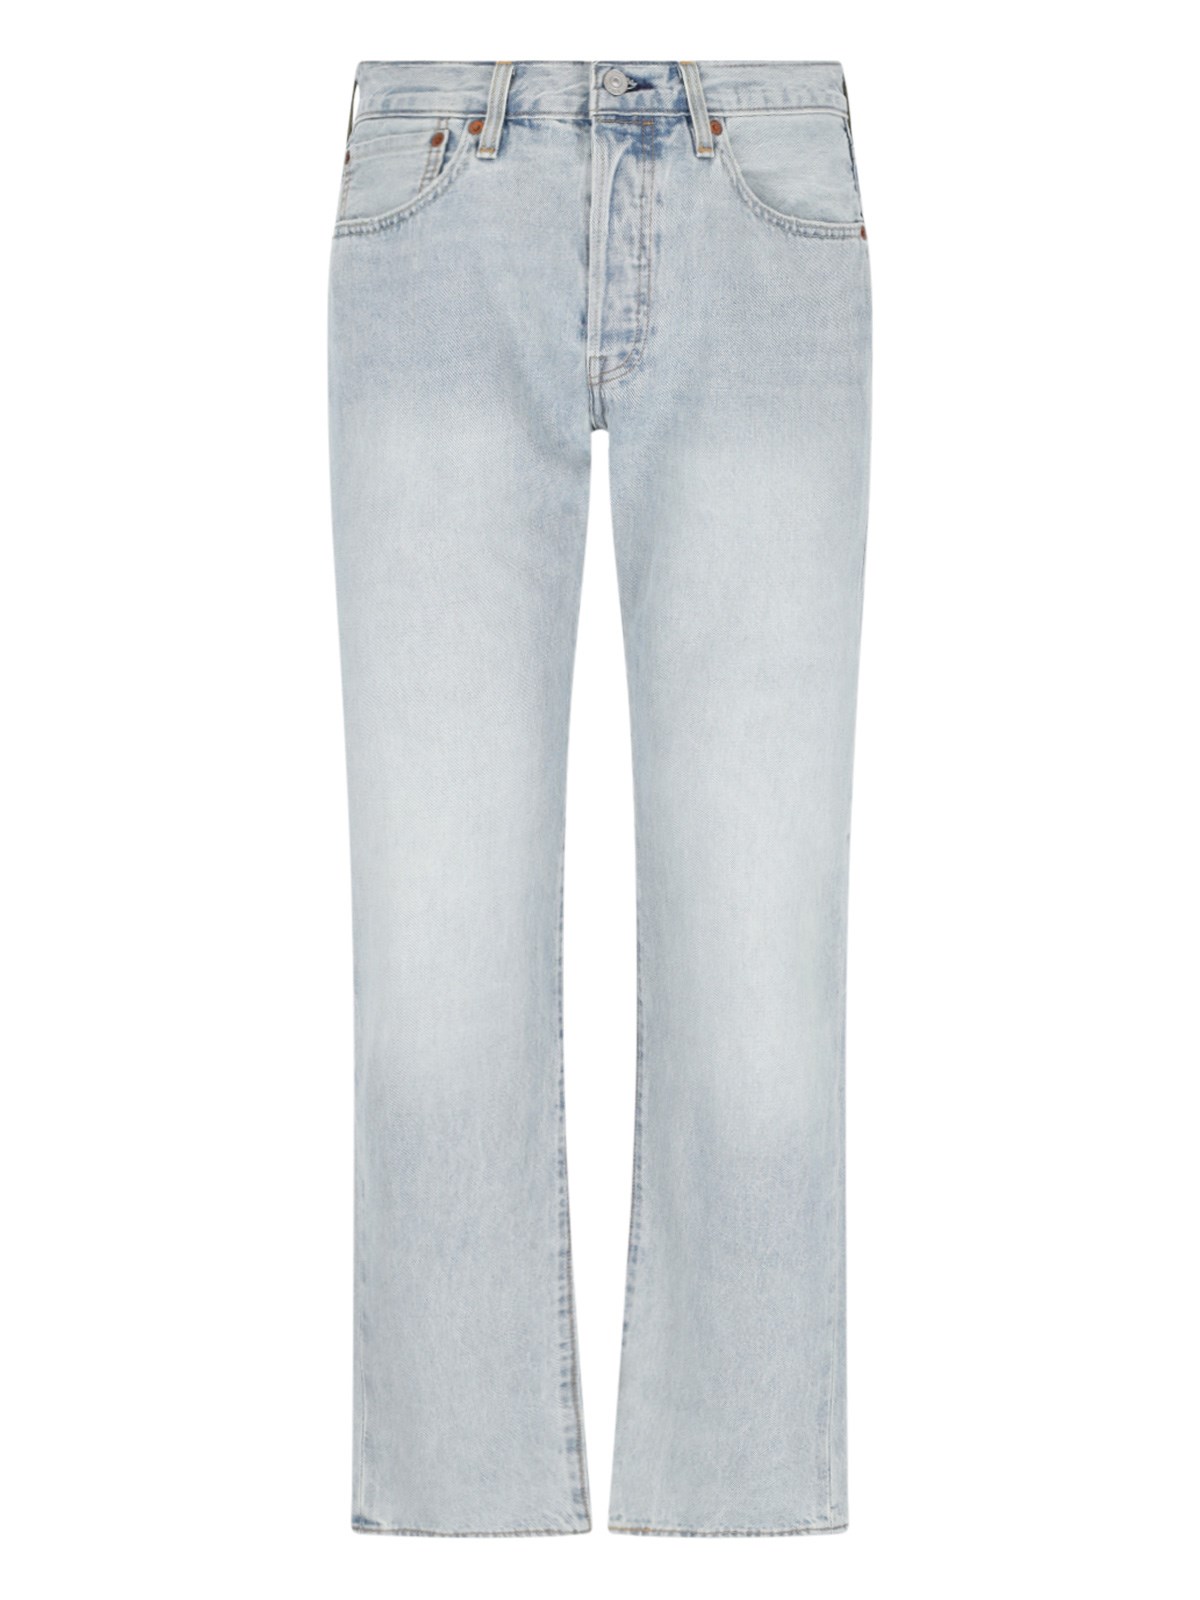 Levi's Strauss '501' Jeans In Light Blue